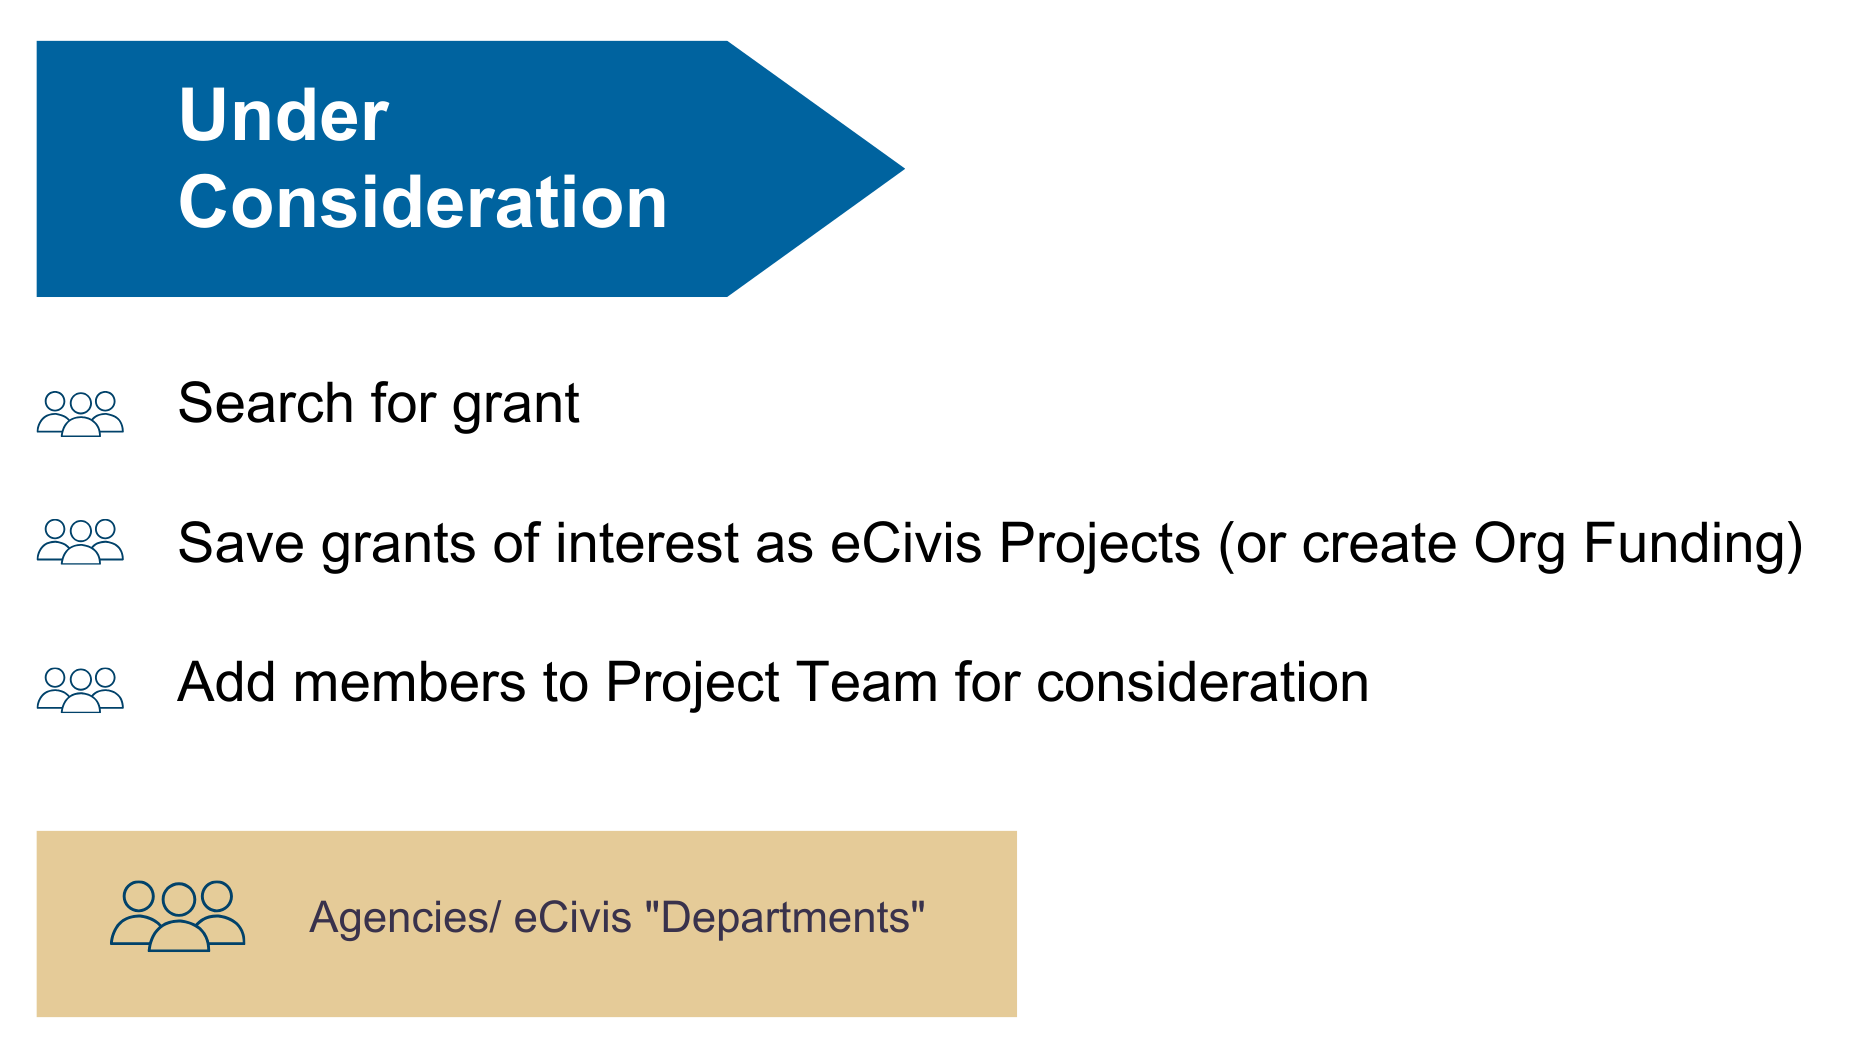 The first stage of the Grantee Lifecycle is called Under Consideration, which includes searching for grants of interest, or creating Organization Funding, so an eCivis Project can be created. Then a Project Team should be built to include members who would need access to the eCivis Project.